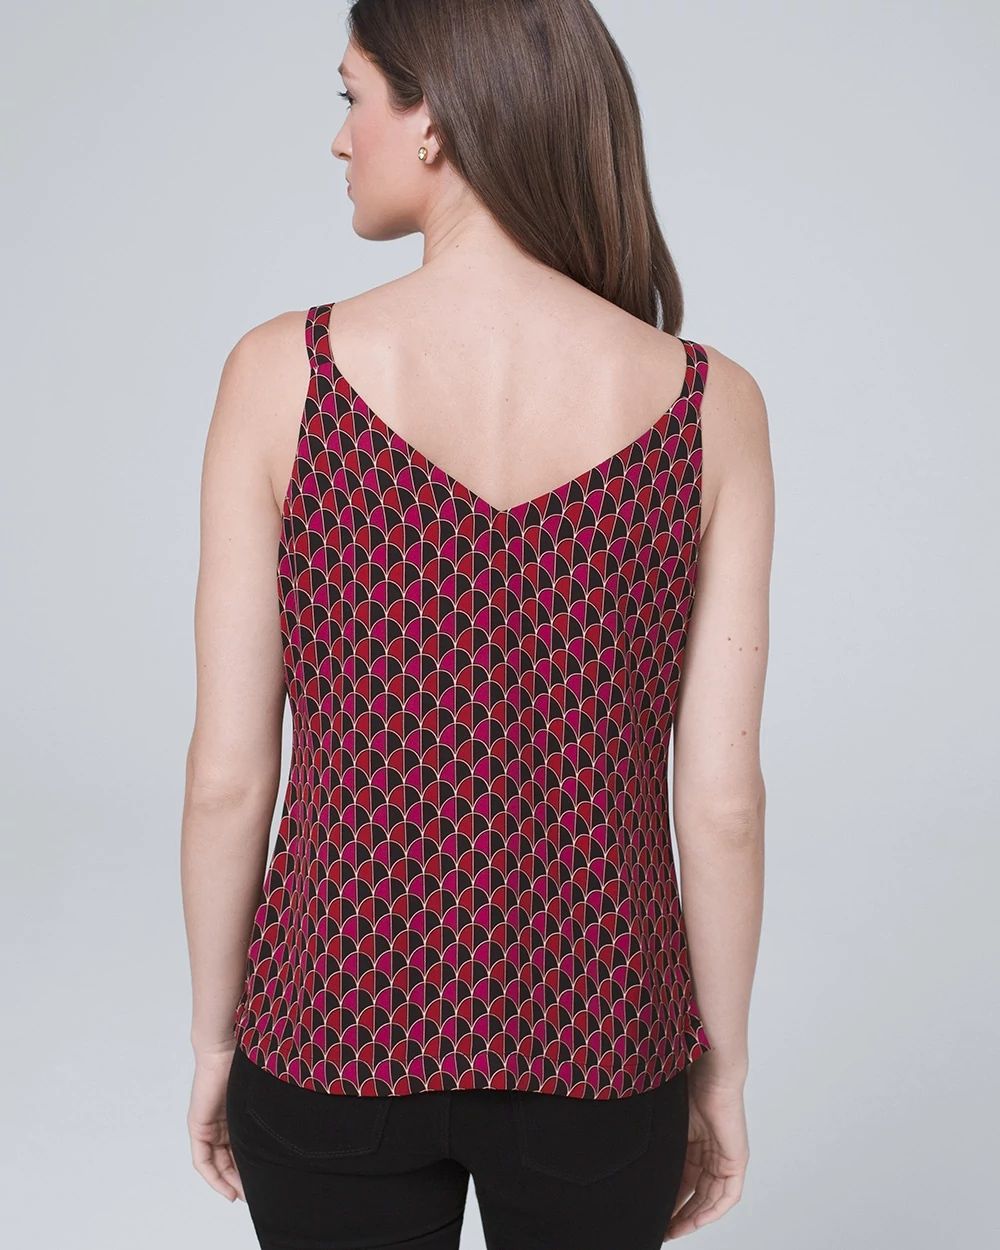 ULTIMATE REVERSIBLE ZEBRA/DOT CAMISOLE click to view larger image.